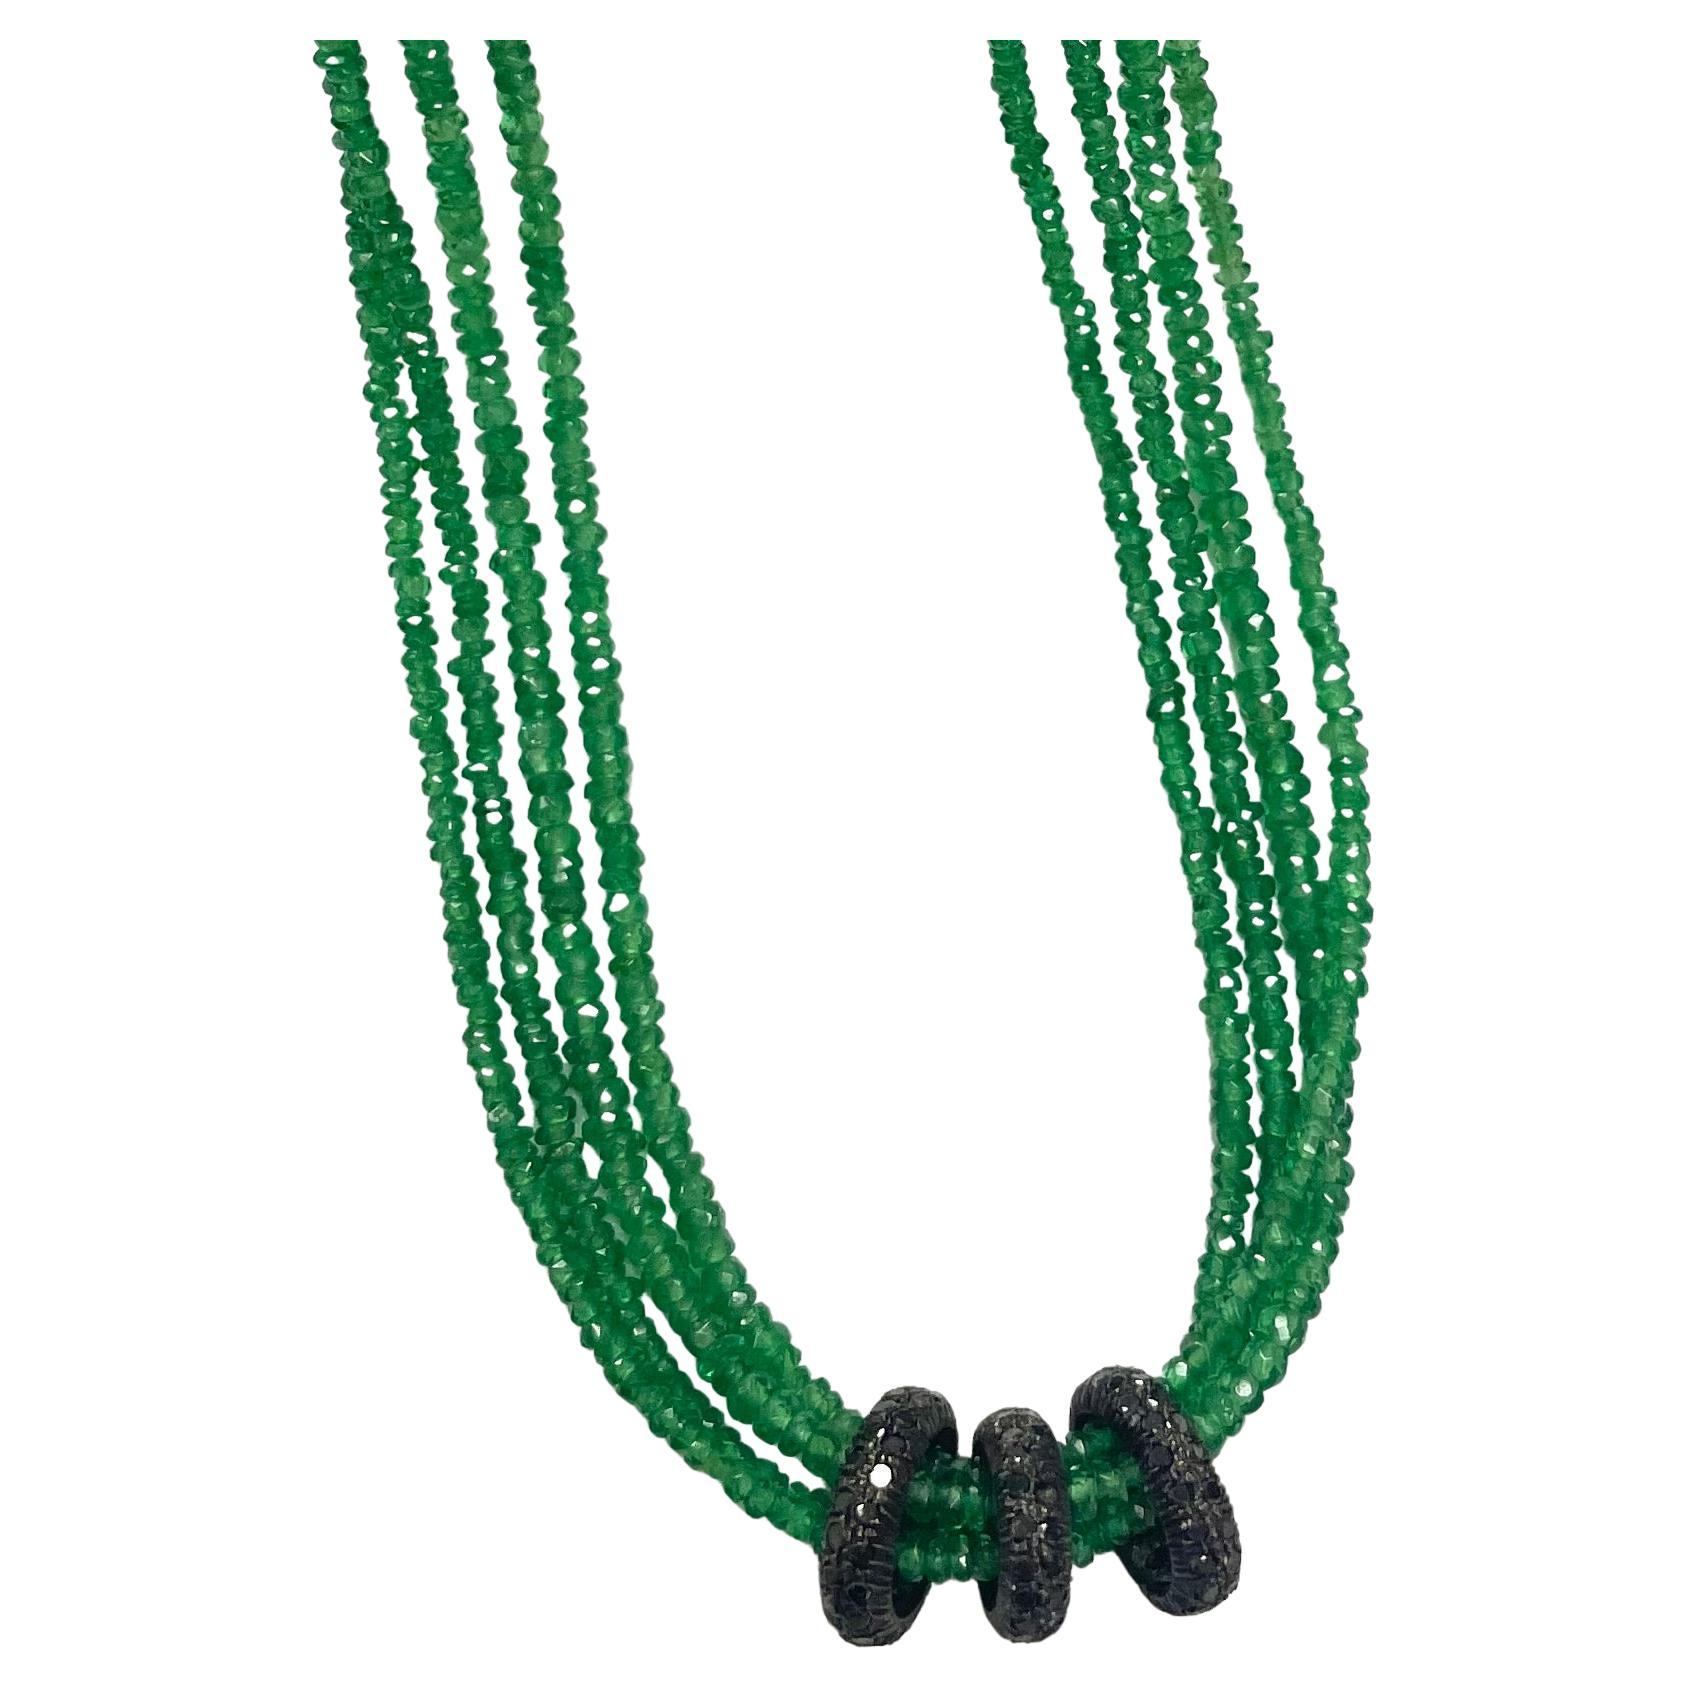 Description
Vibrant green, rare Tsavorite Garnet faceted rondelles, 4 strand necklace, embellished with 3 black pave diamond floating oval rings. 
Item # N3817. 
Check out matching Earrings (see photo) Item # E3114 ($7,550)
We also suggest a